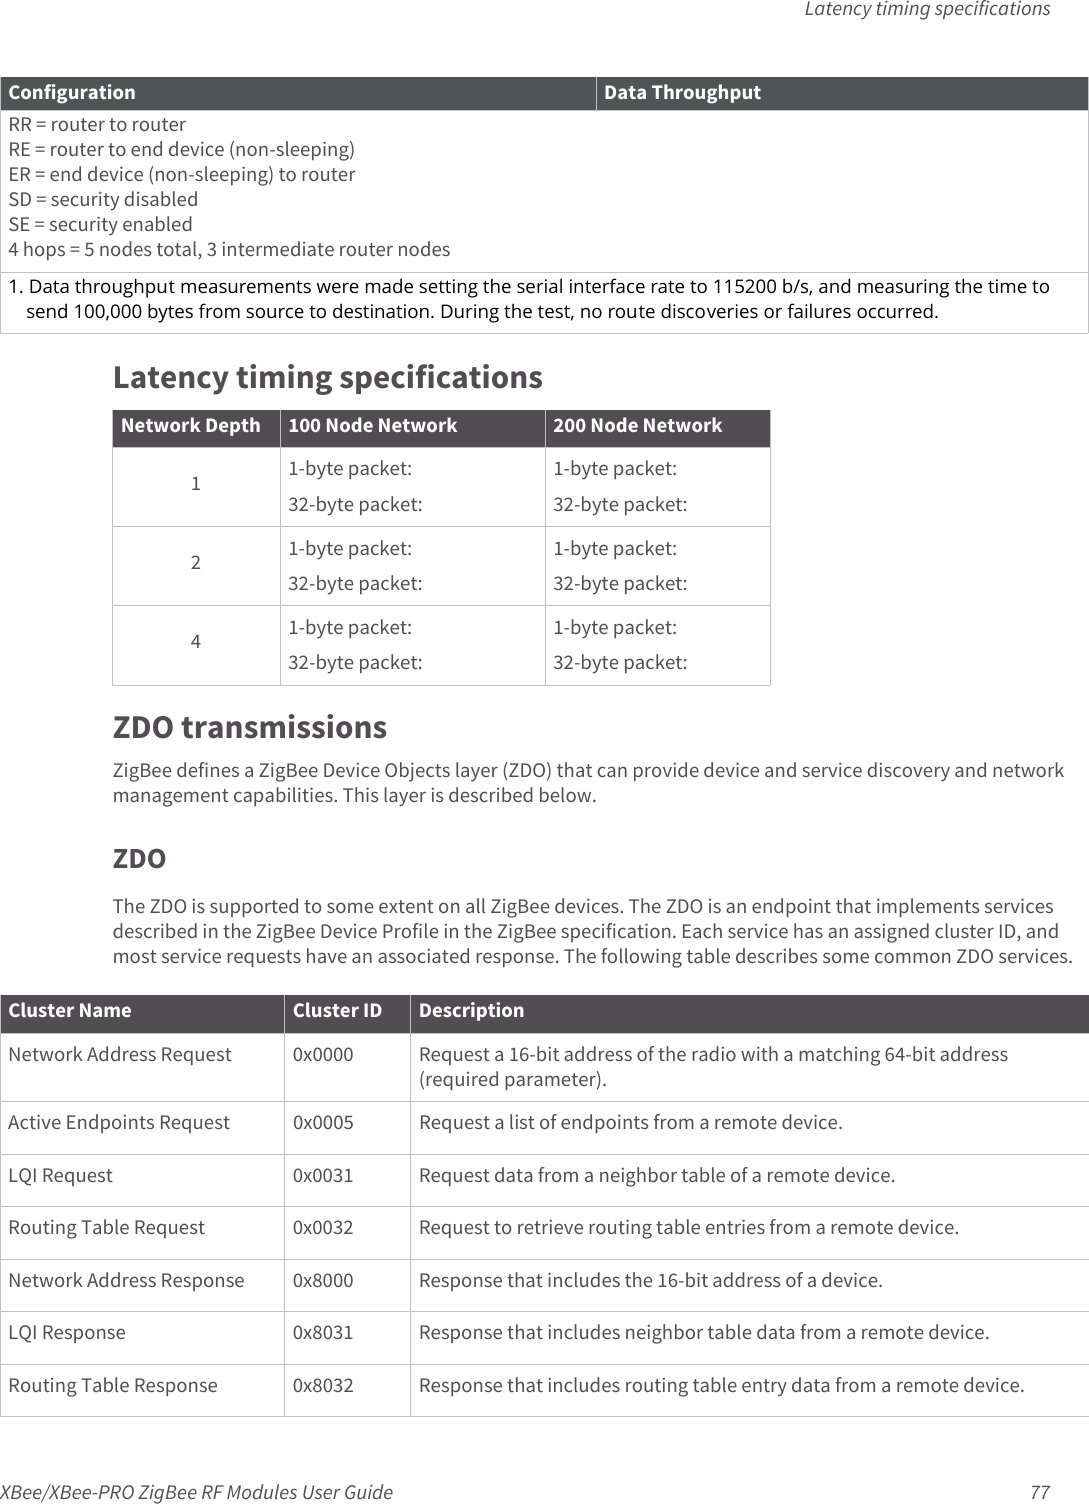 Latency timing specificationsXBee/XBee-PRO ZigBee RF Modules User Guide 77Latency timing specificationsZDO transmissionsZigBee defines a ZigBee Device Objects layer (ZDO) that can provide device and service discovery and network management capabilities. This layer is described below.ZDOThe ZDO is supported to some extent on all ZigBee devices. The ZDO is an endpoint that implements services described in the ZigBee Device Profile in the ZigBee specification. Each service has an assigned cluster ID, and most service requests have an associated response. The following table describes some common ZDO services.RR = router to routerRE = router to end device (non-sleeping)ER = end device (non-sleeping) to routerSD = security disabledSE = security enabled4 hops = 5 nodes total, 3 intermediate router nodes1. Data throughput measurements were made setting the serial interface rate to 115200 b/s, and measuring the time to send 100,000 bytes from source to destination. During the test, no route discoveries or failures occurred.Configuration Data ThroughputNetwork Depth 100 Node Network 200 Node Network11-byte packet:32-byte packet:1-byte packet:32-byte packet:21-byte packet:32-byte packet:1-byte packet:32-byte packet:41-byte packet:32-byte packet:1-byte packet:32-byte packet:Cluster Name Cluster ID DescriptionNetwork Address Request 0x0000 Request a 16-bit address of the radio with a matching 64-bit address (required parameter).Active Endpoints Request 0x0005 Request a list of endpoints from a remote device.LQI Request 0x0031 Request data from a neighbor table of a remote device.Routing Table Request 0x0032 Request to retrieve routing table entries from a remote device.Network Address Response 0x8000 Response that includes the 16-bit address of a device.LQI Response 0x8031 Response that includes neighbor table data from a remote device.Routing Table Response 0x8032 Response that includes routing table entry data from a remote device.